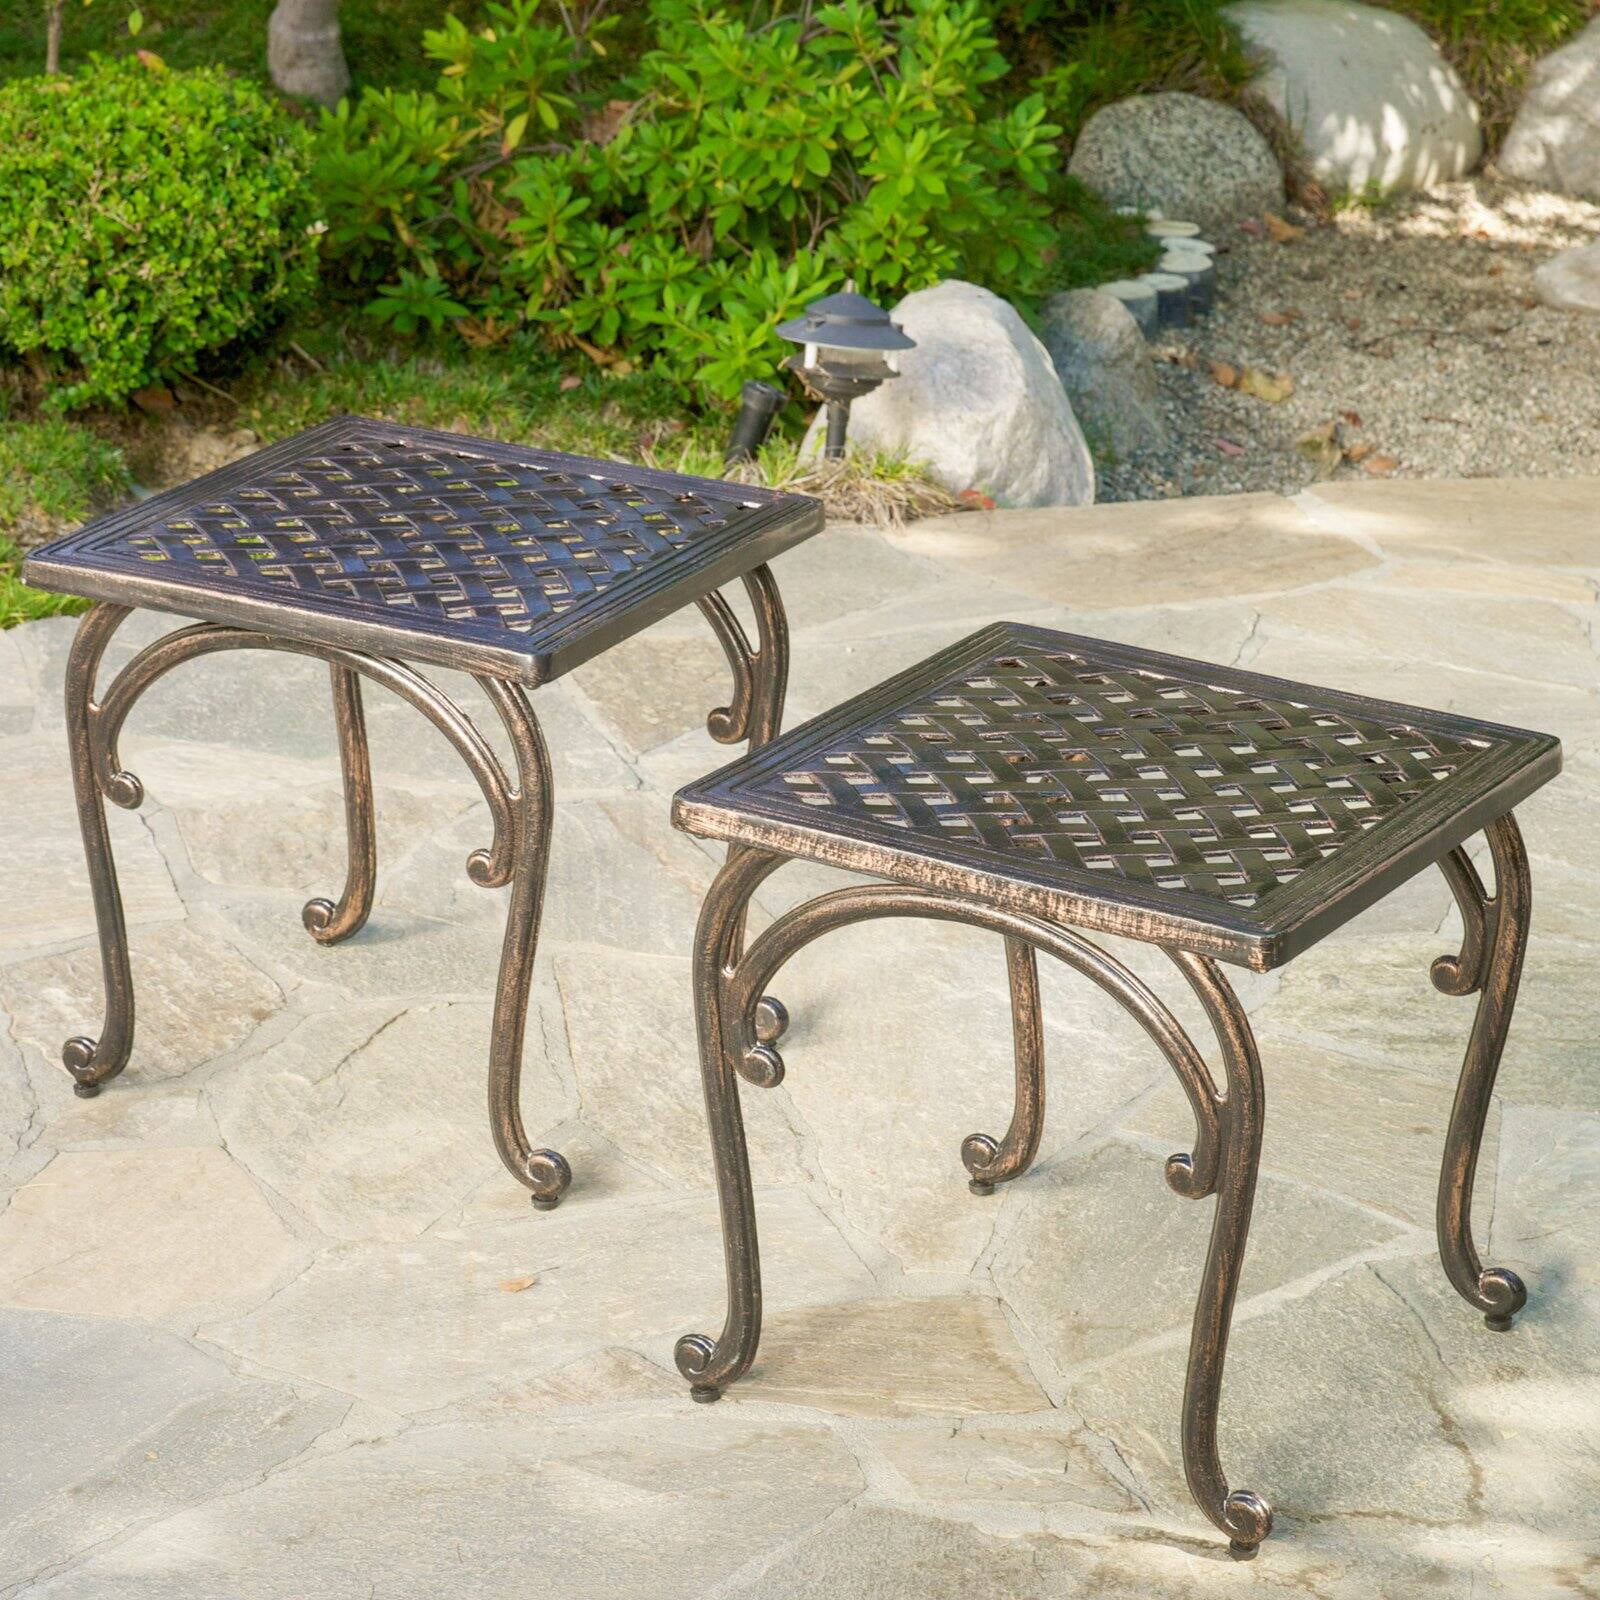 Details about   Cast Aluminum Side Table Outdoor Patio Yard Pool Furniture Table 18 Inch Bronze 